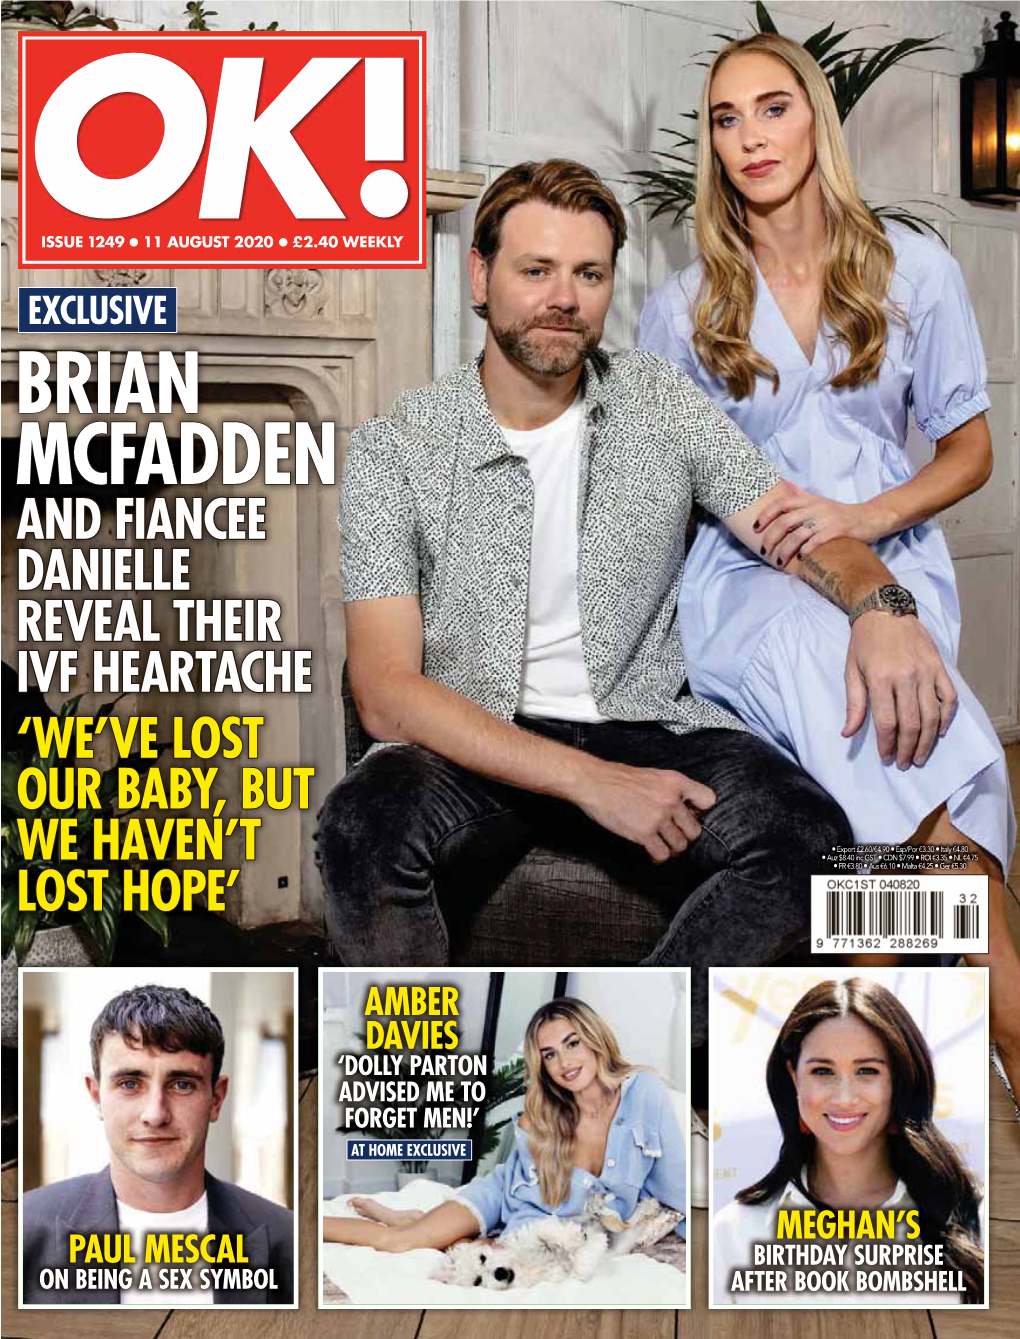 Brian Mcfadden and Fiancee Danielle Reveal Their Ivf Heartache ‘We’Ve Lost Our Baby, But